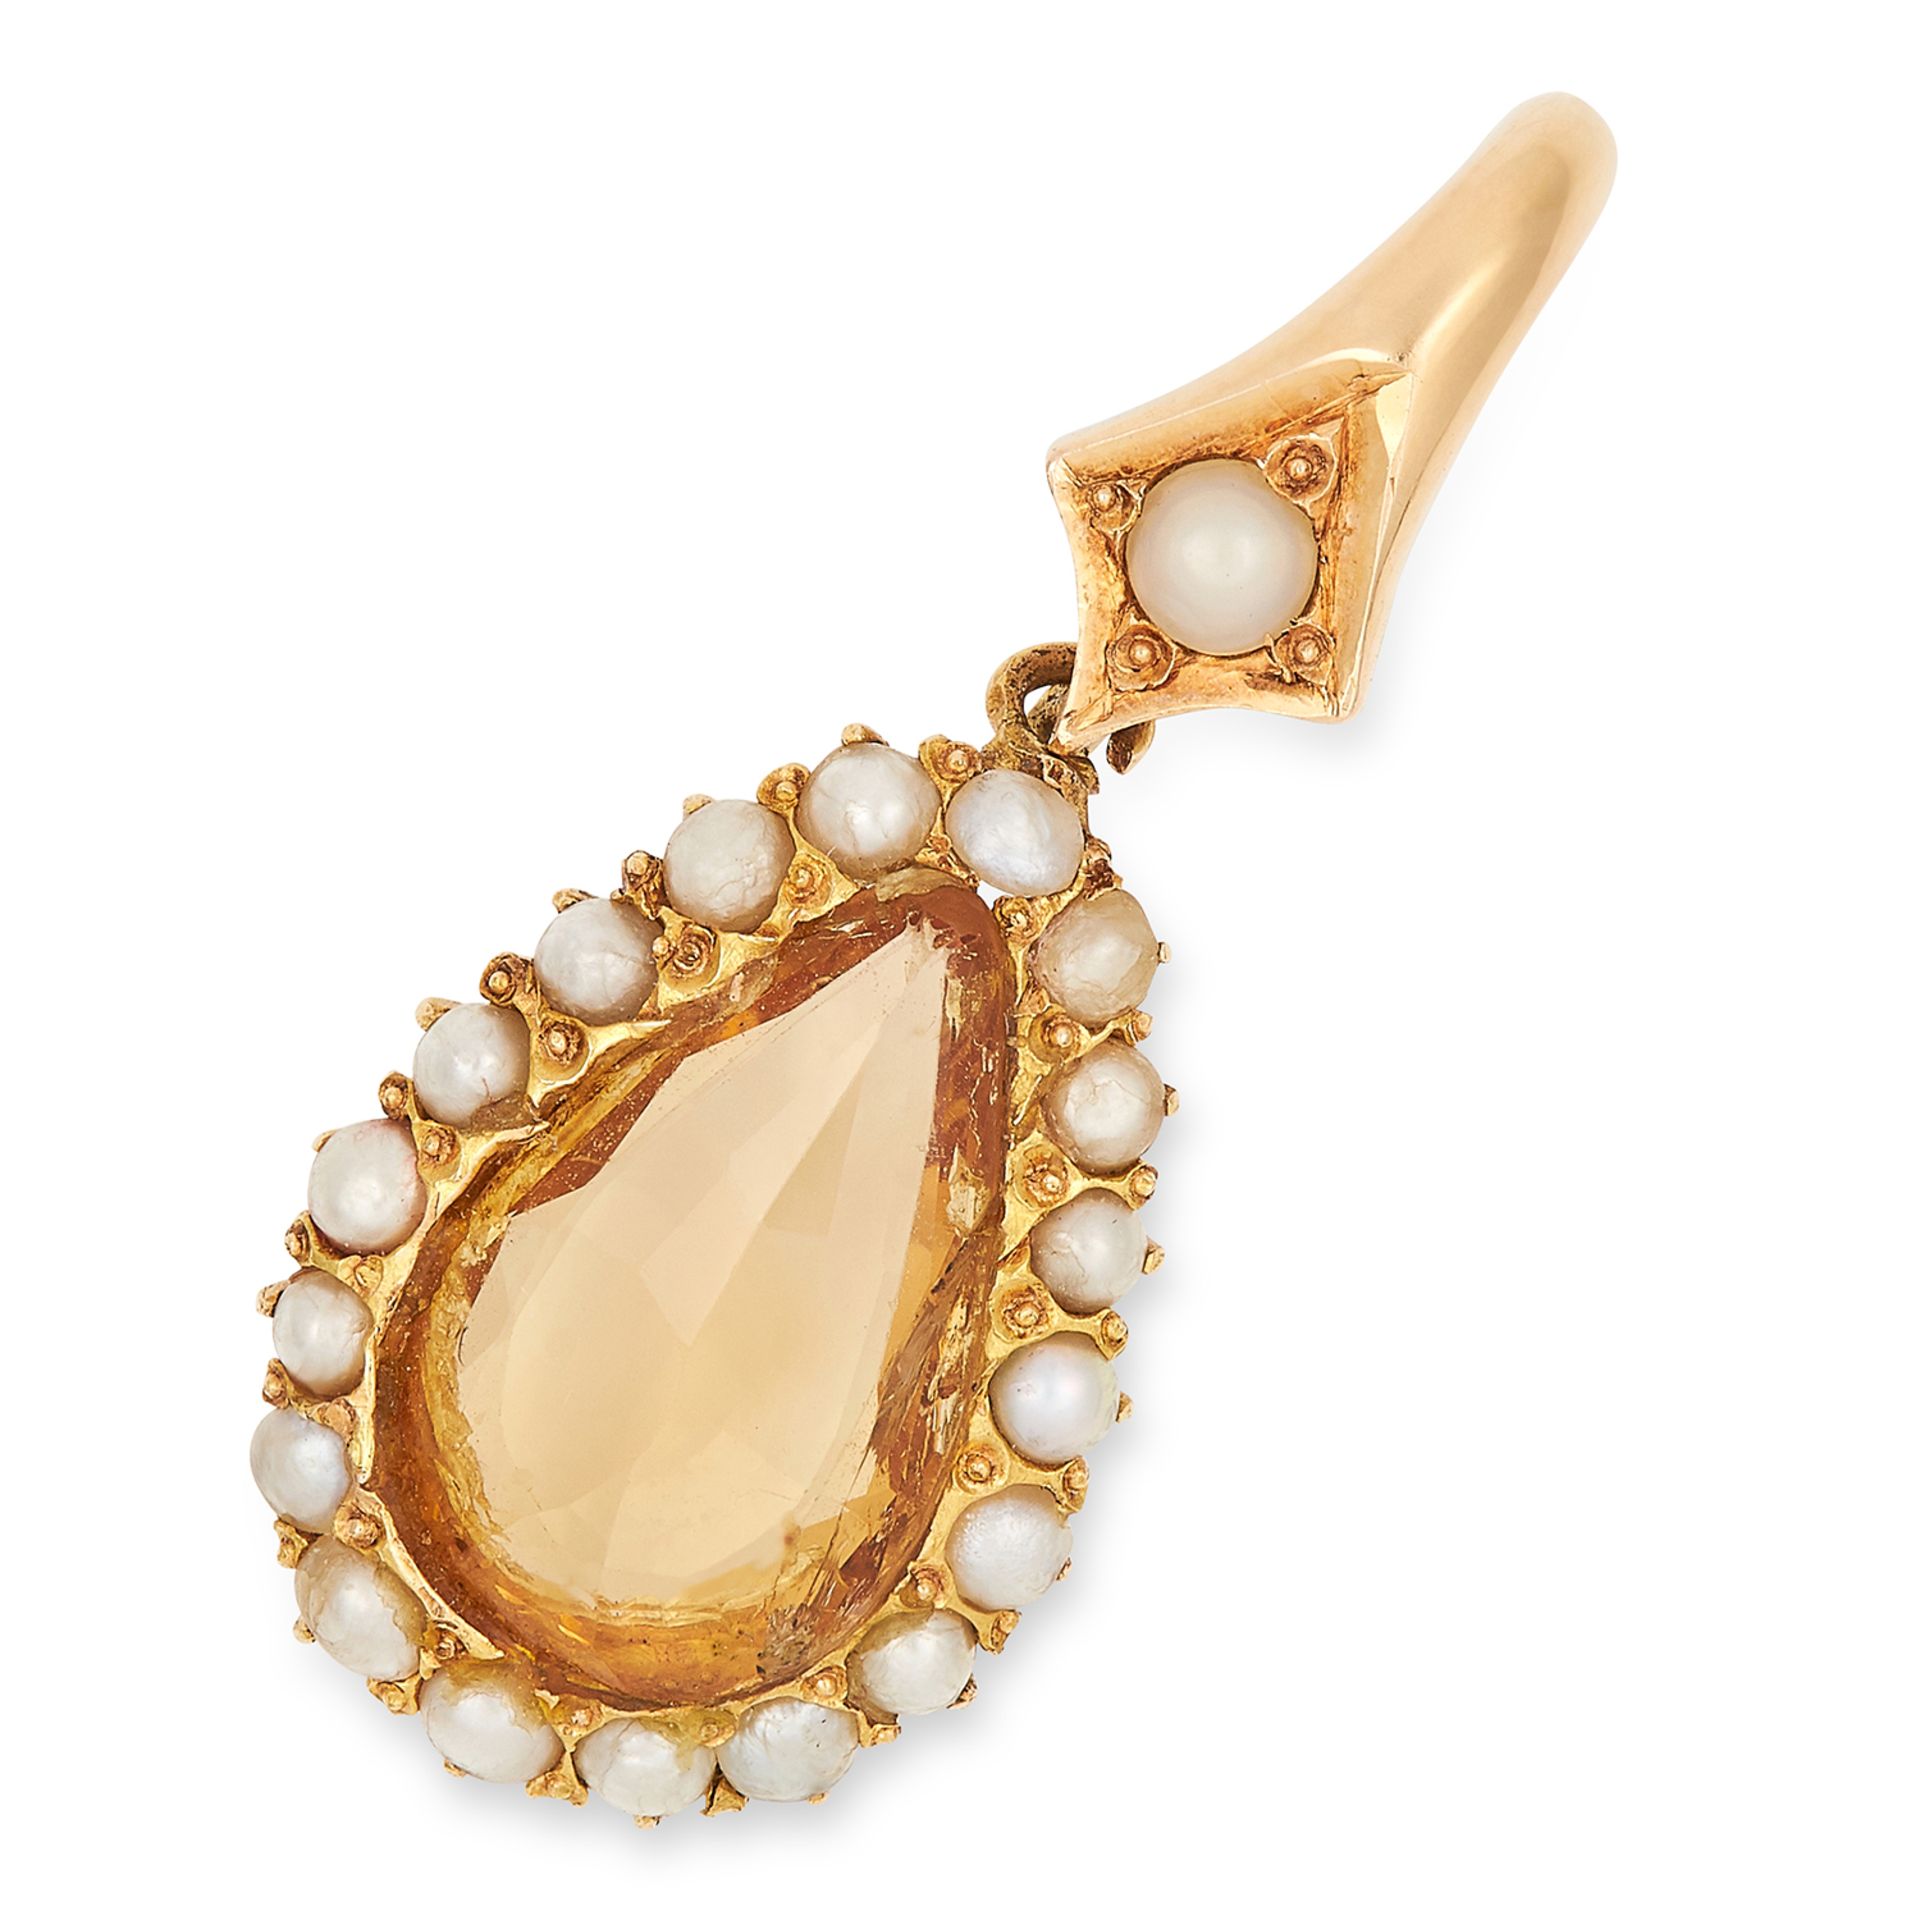 AN ANTIQUE IMPERIAL TOPAZ AND PEARL PENDANT, 19TH CENTURY set with a pear shaped, rose cut topaz and